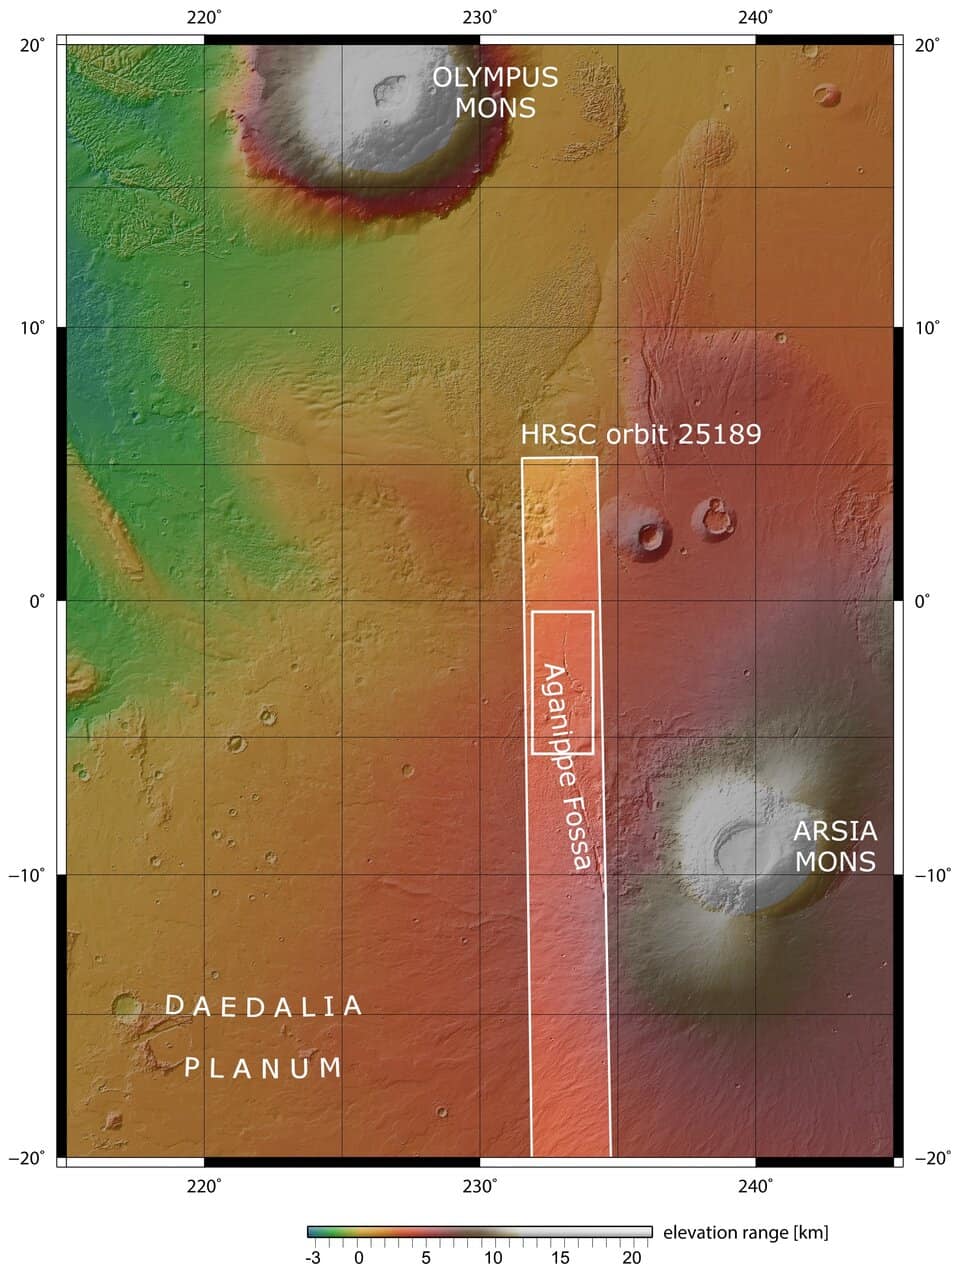 A broad view of Aganippe Fossa, along with Arsia Mons and Olympus Mons